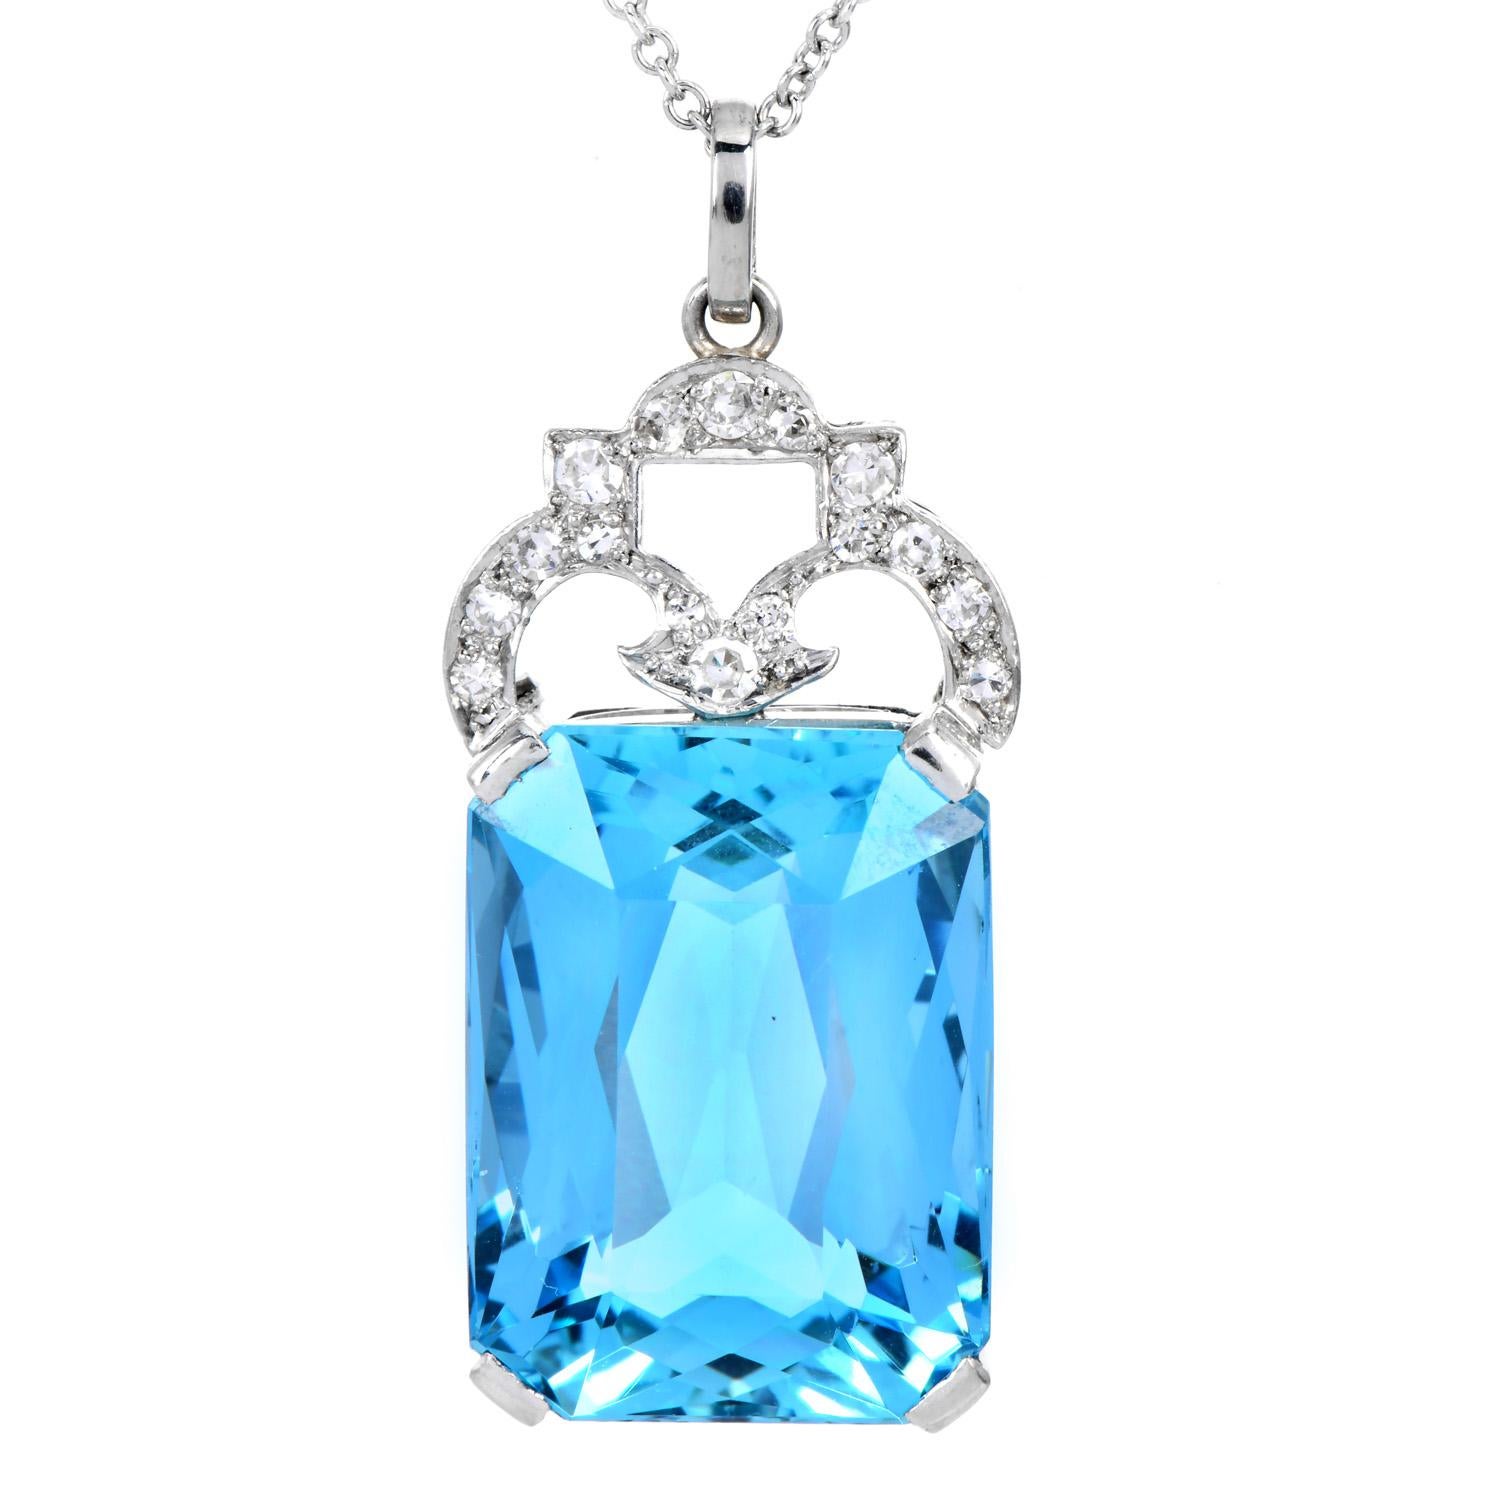 An ocean Blue Aquamarine and Diamond Pendant Necklace in 14K White Gold.

Natural GIA certified as Greenis blue Aquamarine Basket set with a white gold crown decorated with natural Single cut near colorless diamonds. 

Aquamarine is Octagonal